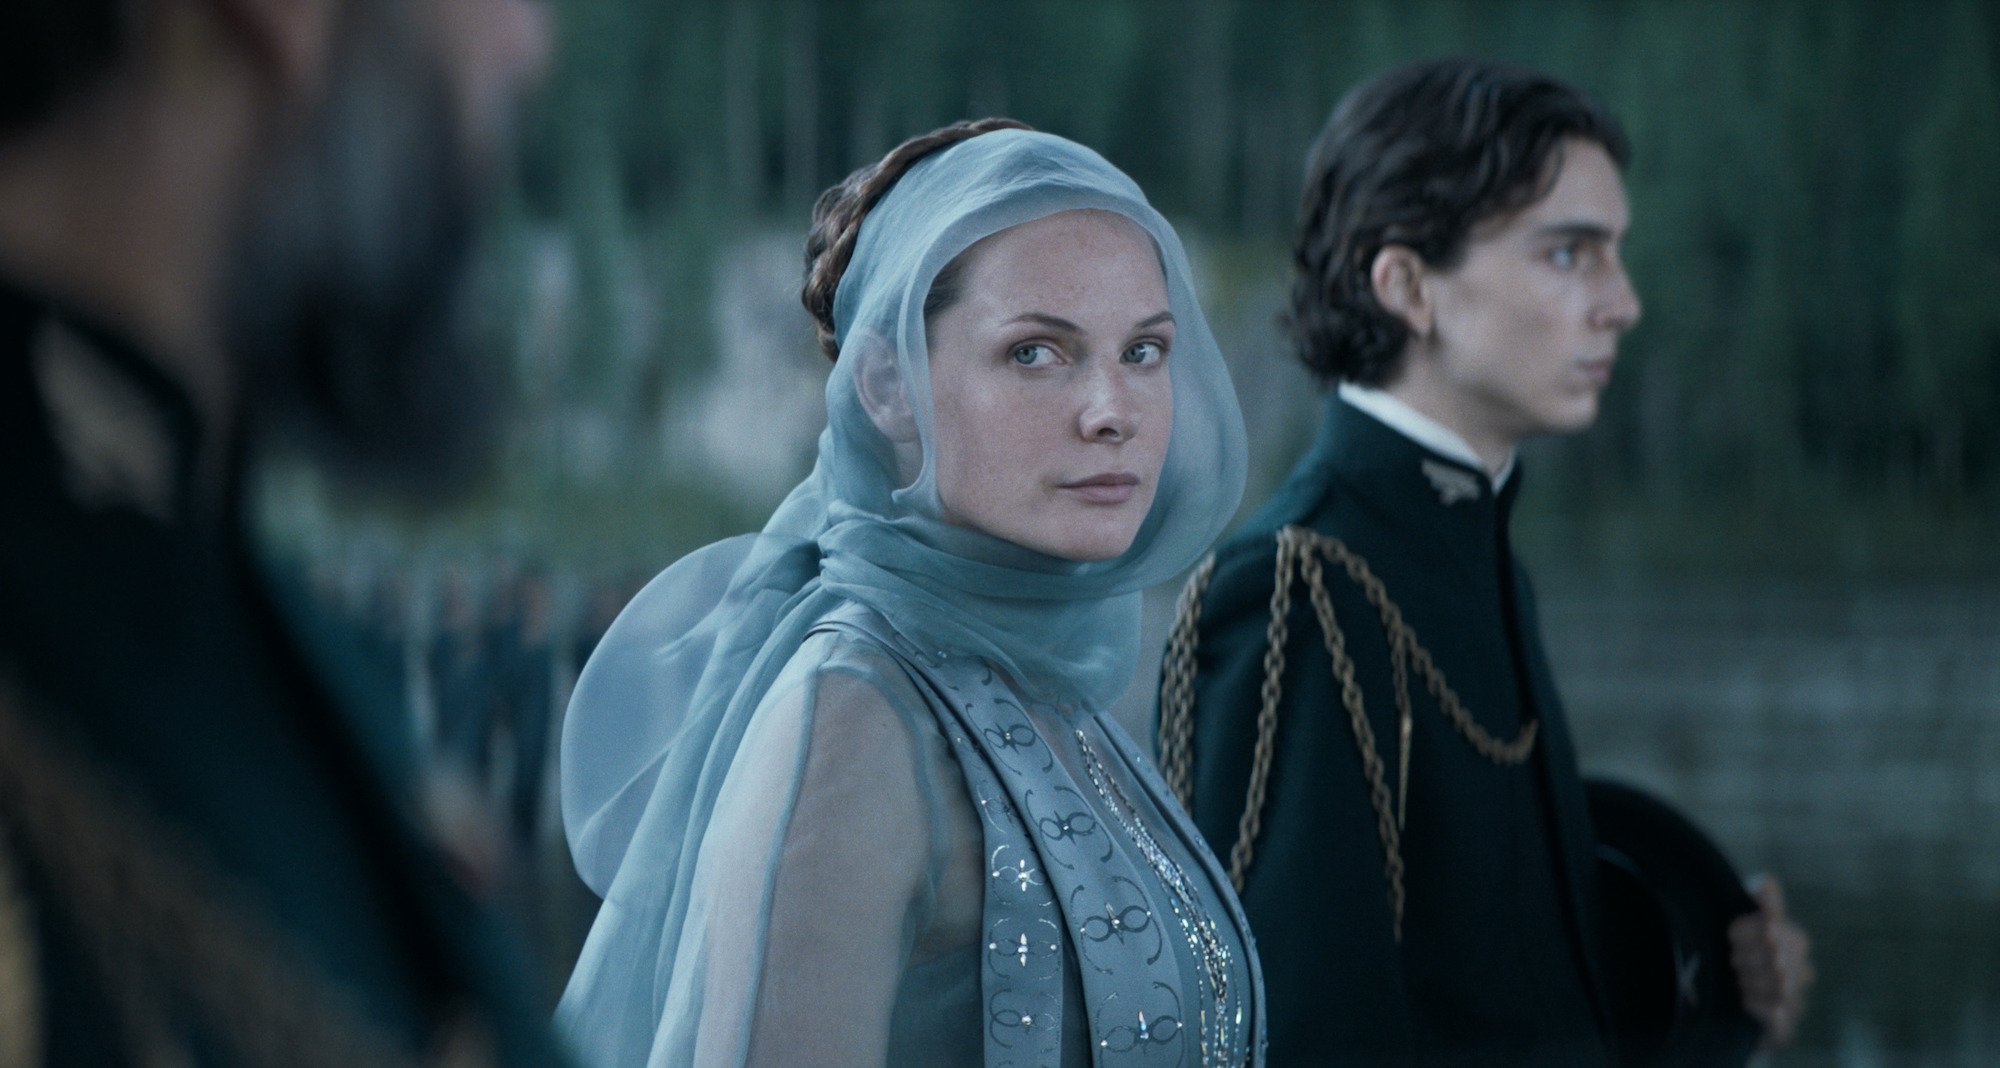 Rebecca Ferguson as Lady Jessica in 'Dune.' She wears a formal light blue gown with blue tulle around her head, neck, and shoulders. Timothée Chalamet stands in the background as Paul Atreides wearing a black formal jacket with a high neck and gold chains on his right shoulder.